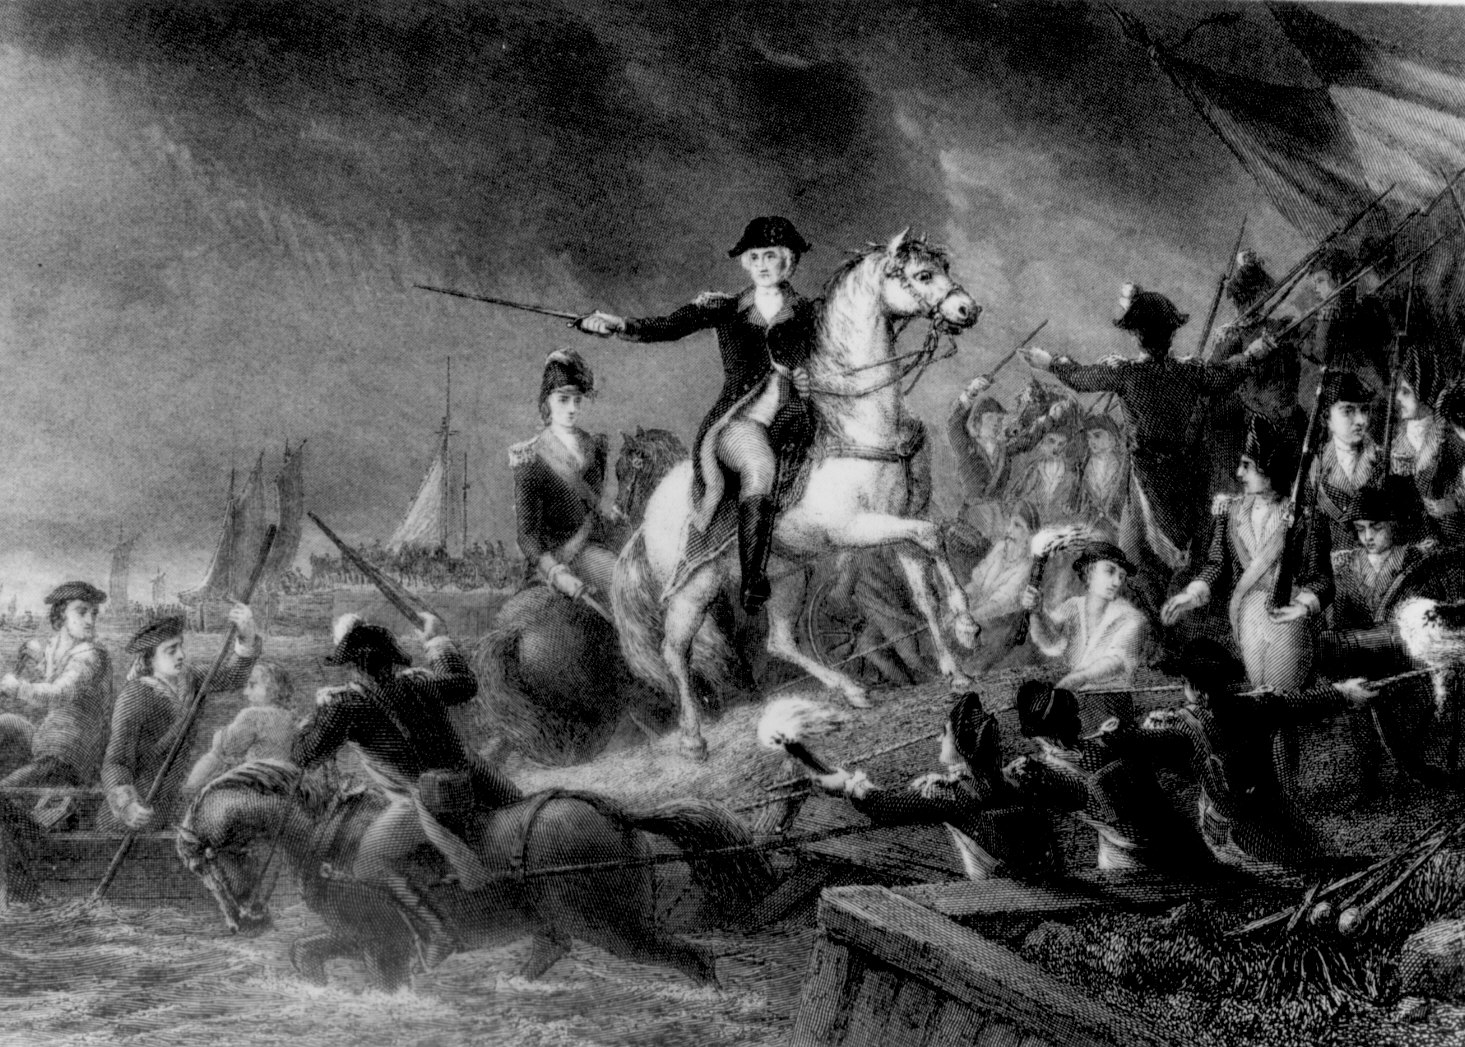 Gen. George Washington’s miraculous retreat from Long Island: He ordered his troops to fast and pray